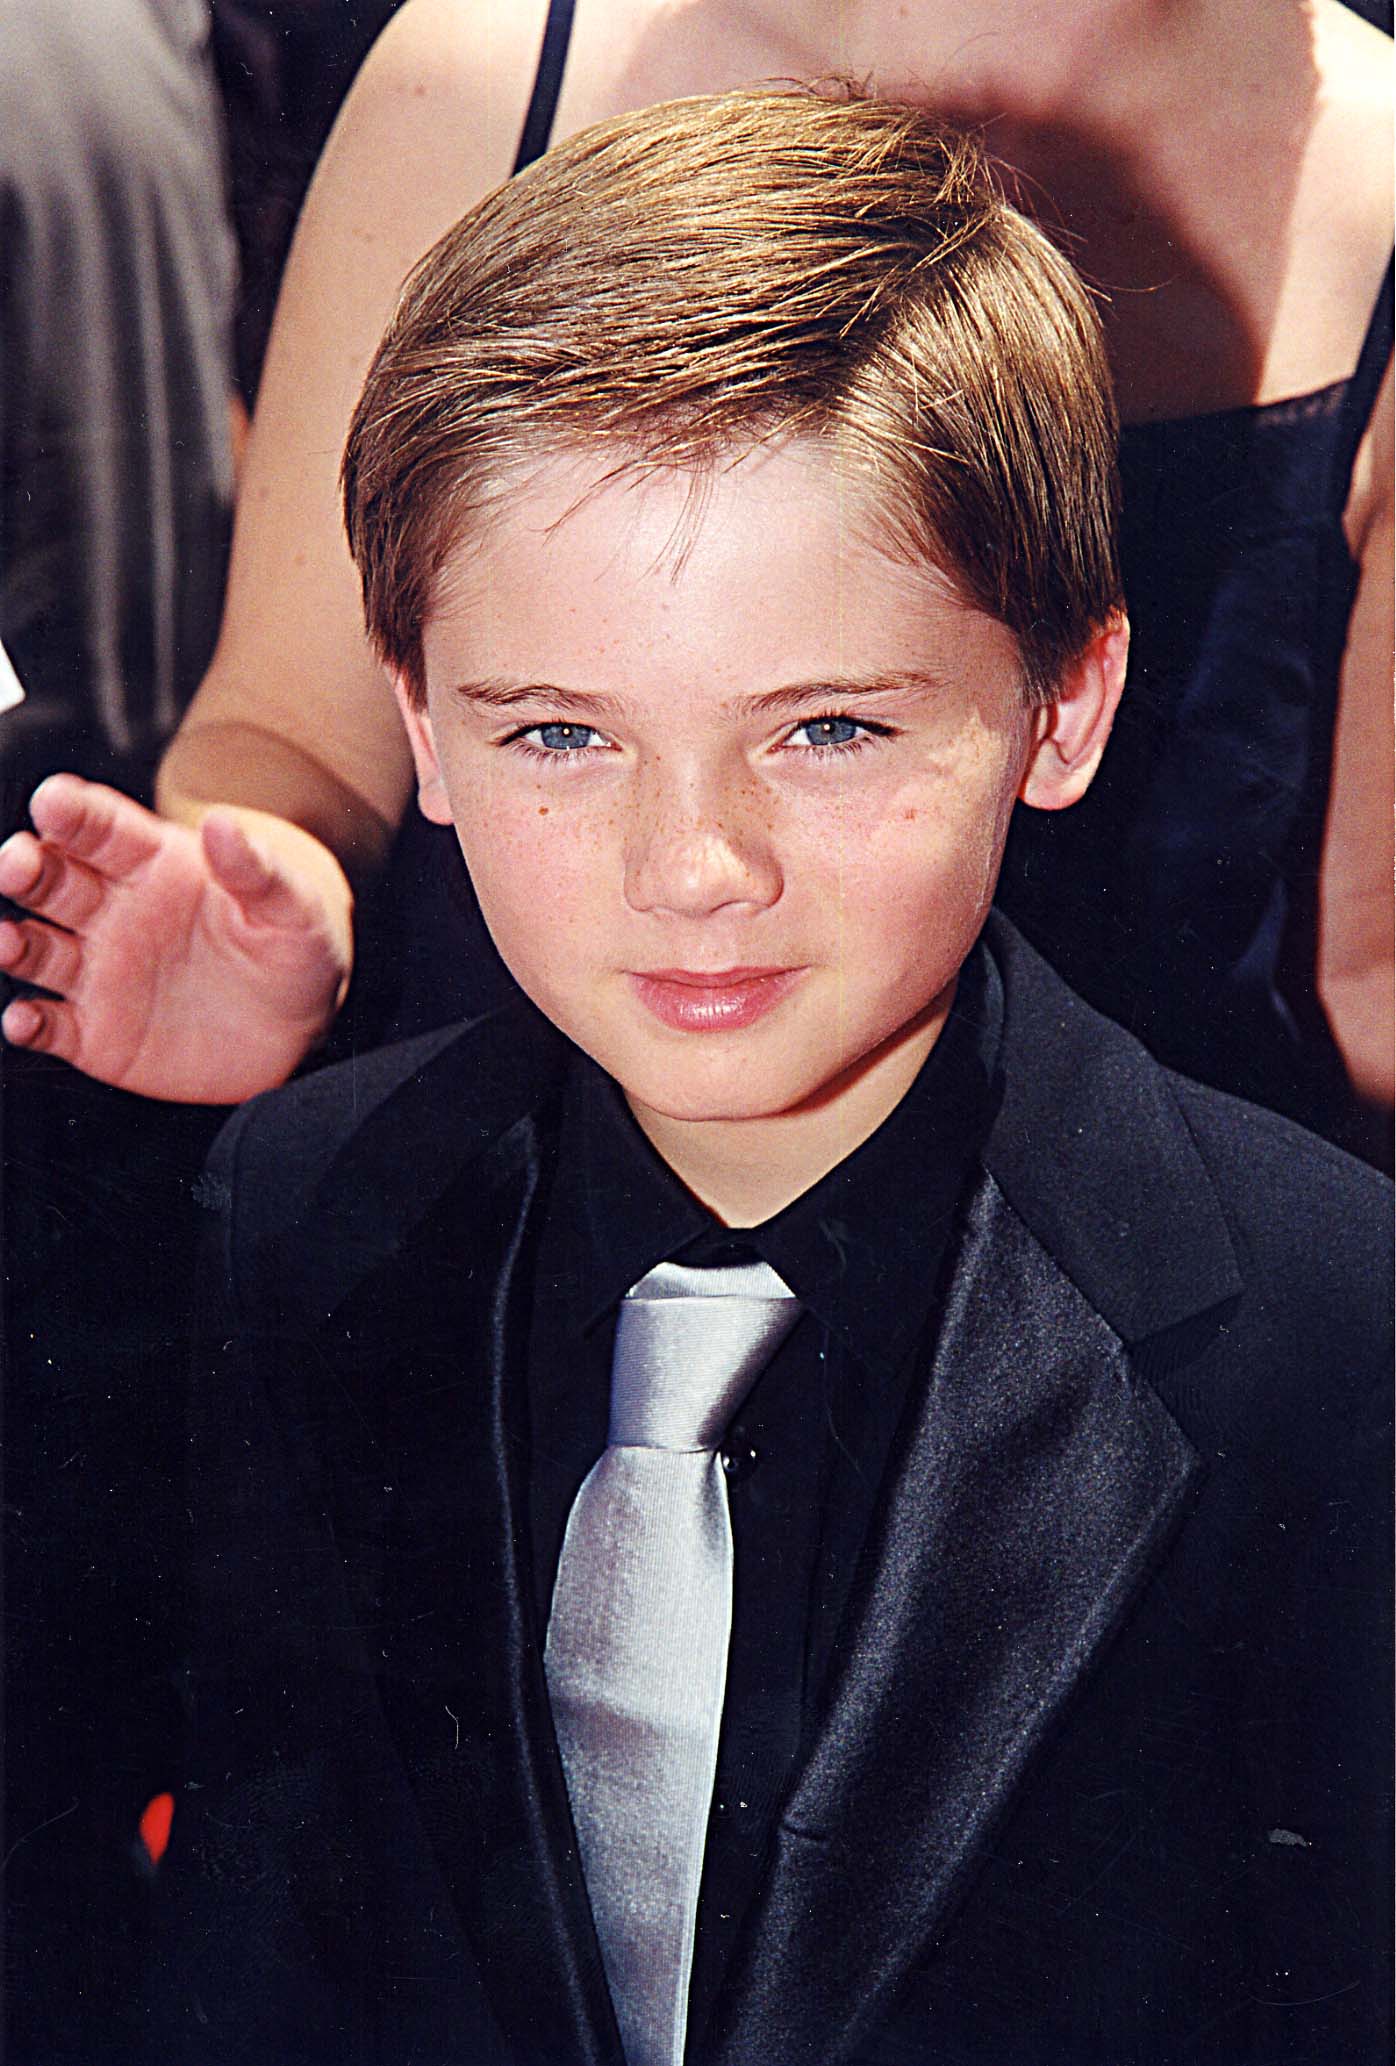 Jake Lloyd at the 1999 premiere of "Star Wars: Phantom Menace" on September 10, 1999 in Los Angeles, California | Source: Getty images